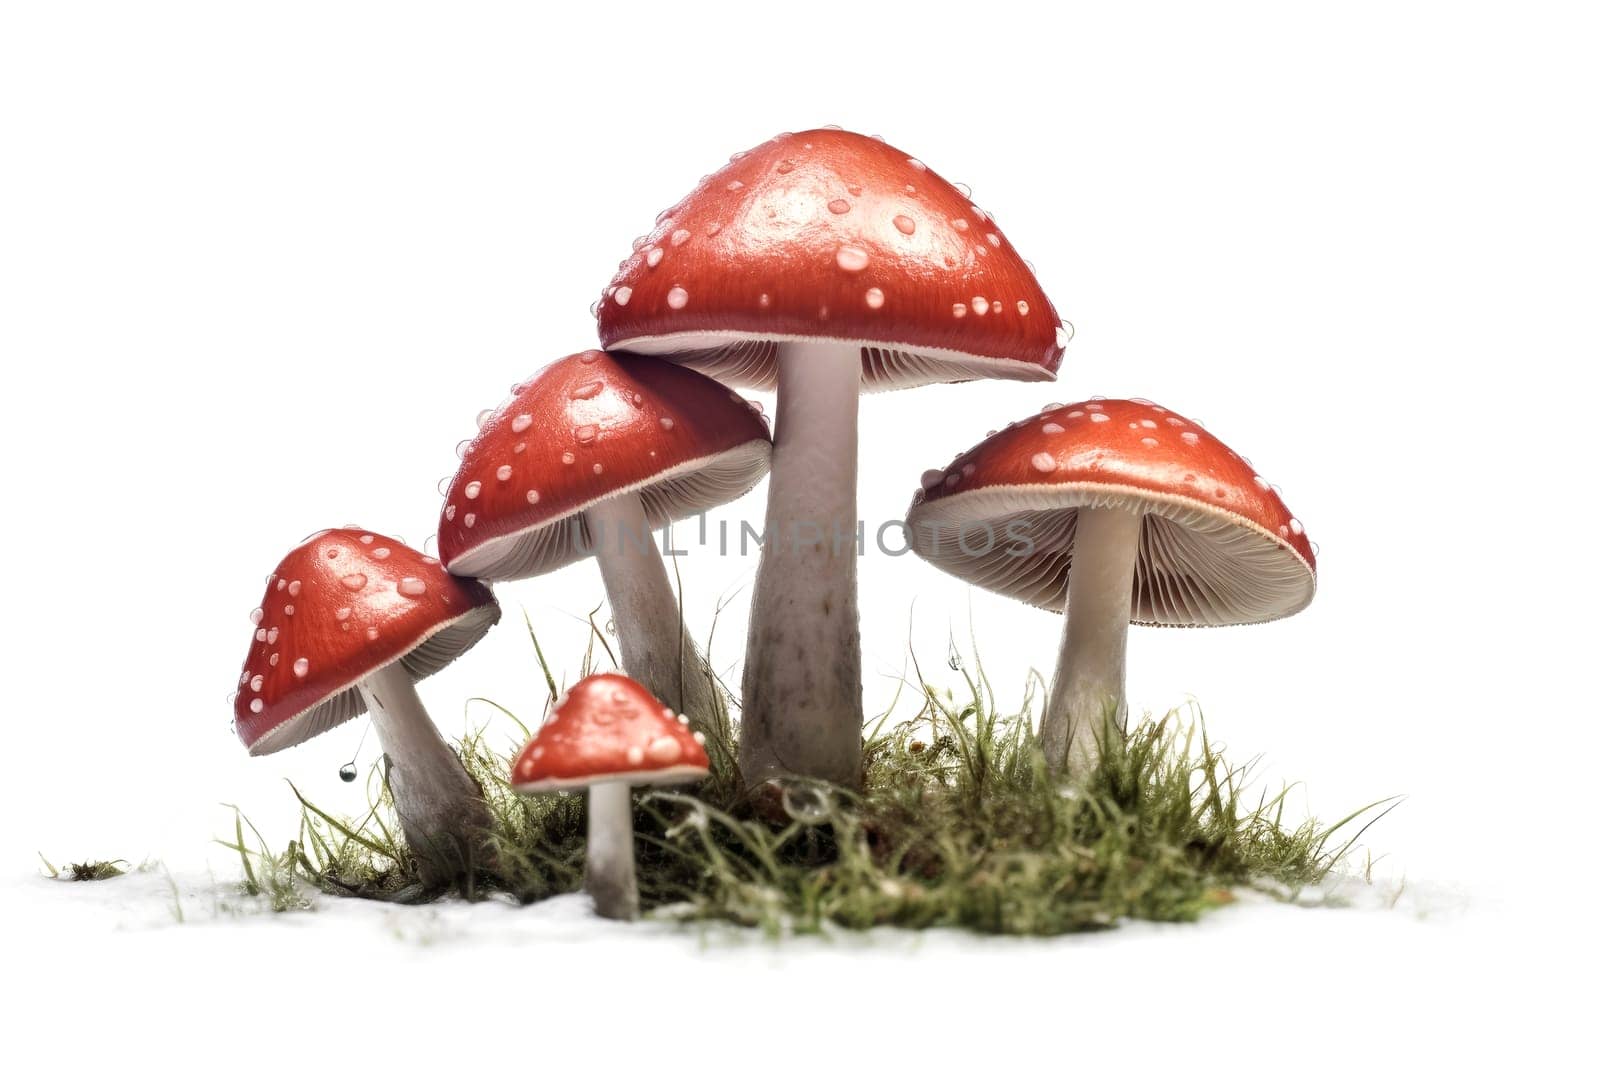 Cluster of red spotted mushrooms on a white background with green moss by andreyz